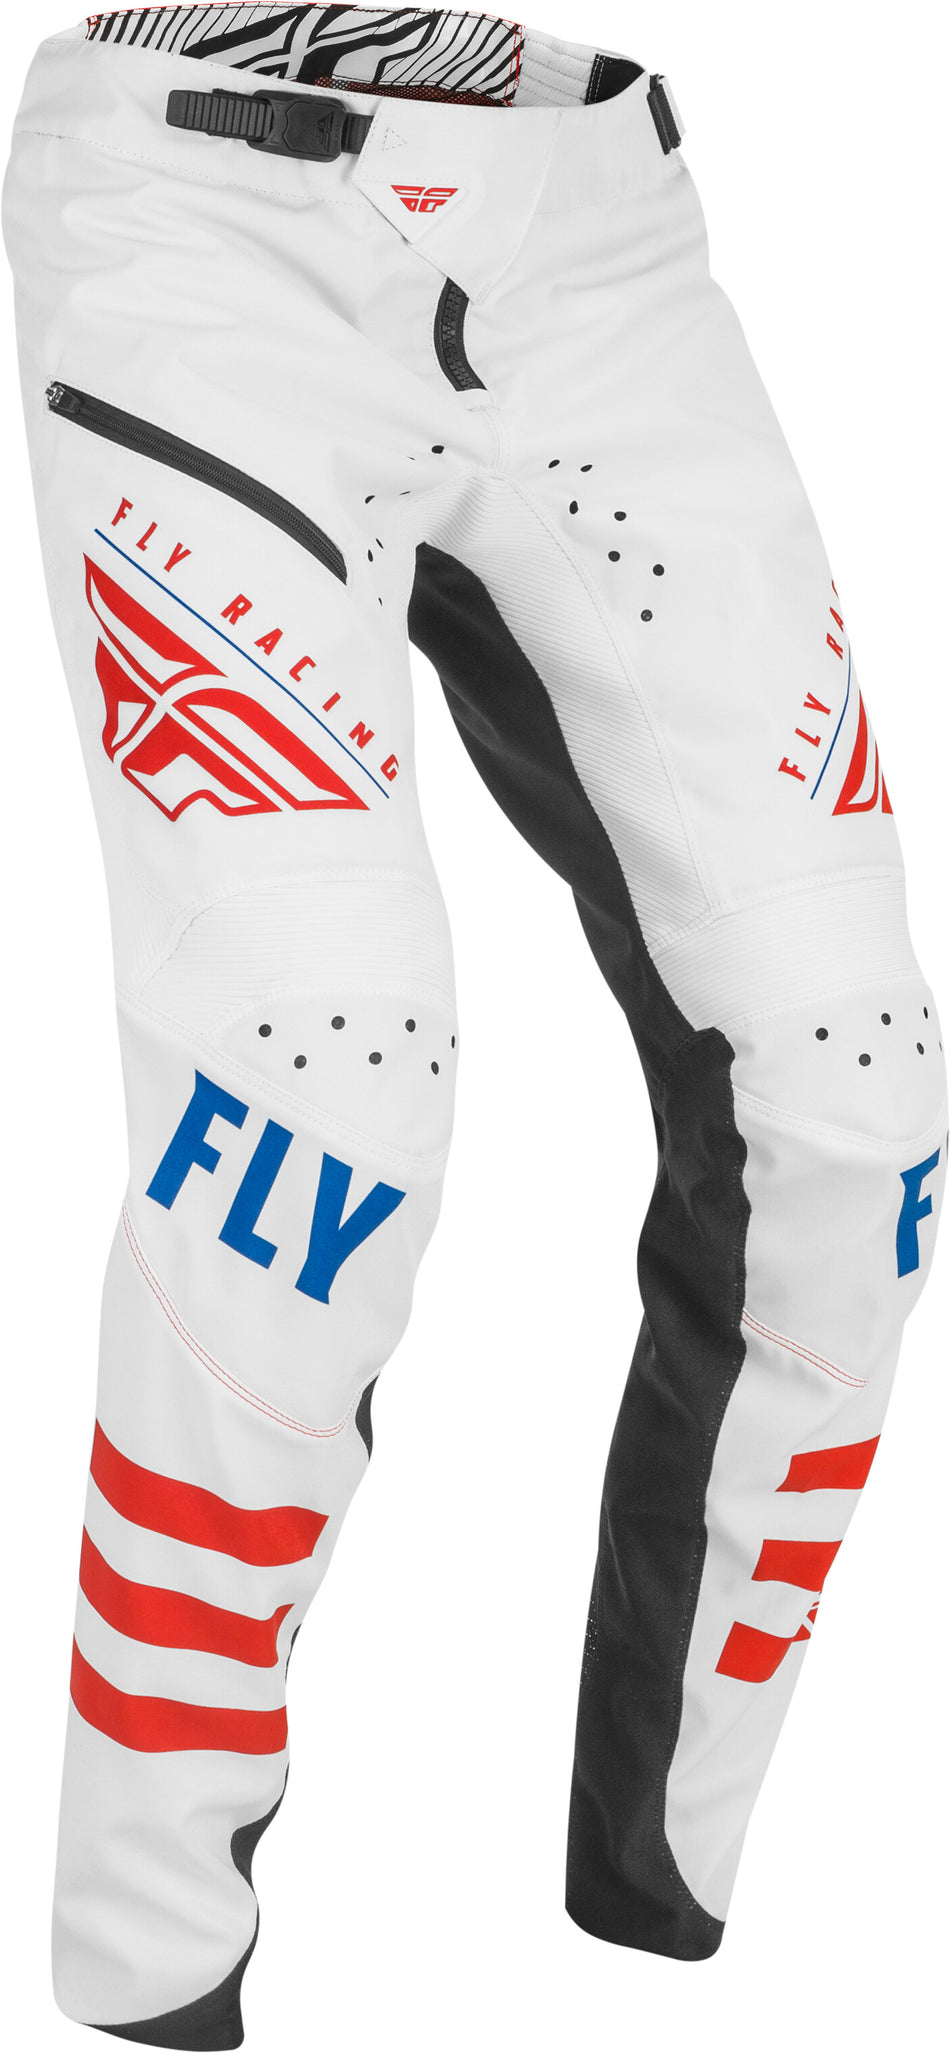 FLY RACING Kinetic Bicycle Le Pants White/Red/Blue Sz 28 374-04428